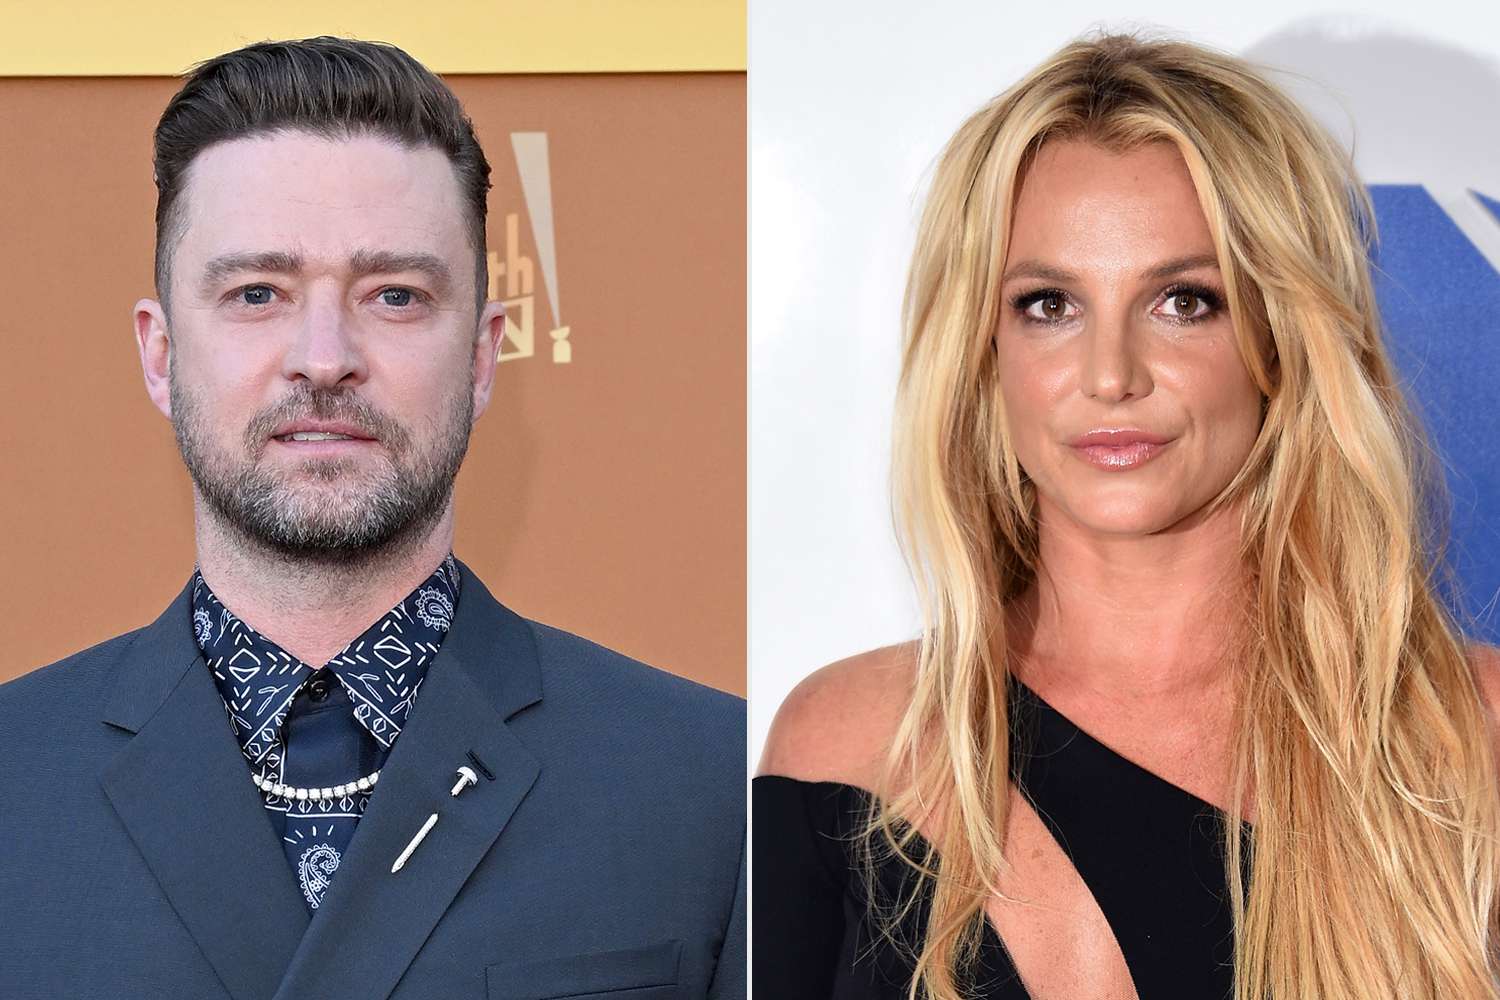 new-claim-disputes-britney-spears-allegation-against-justin-timberlake